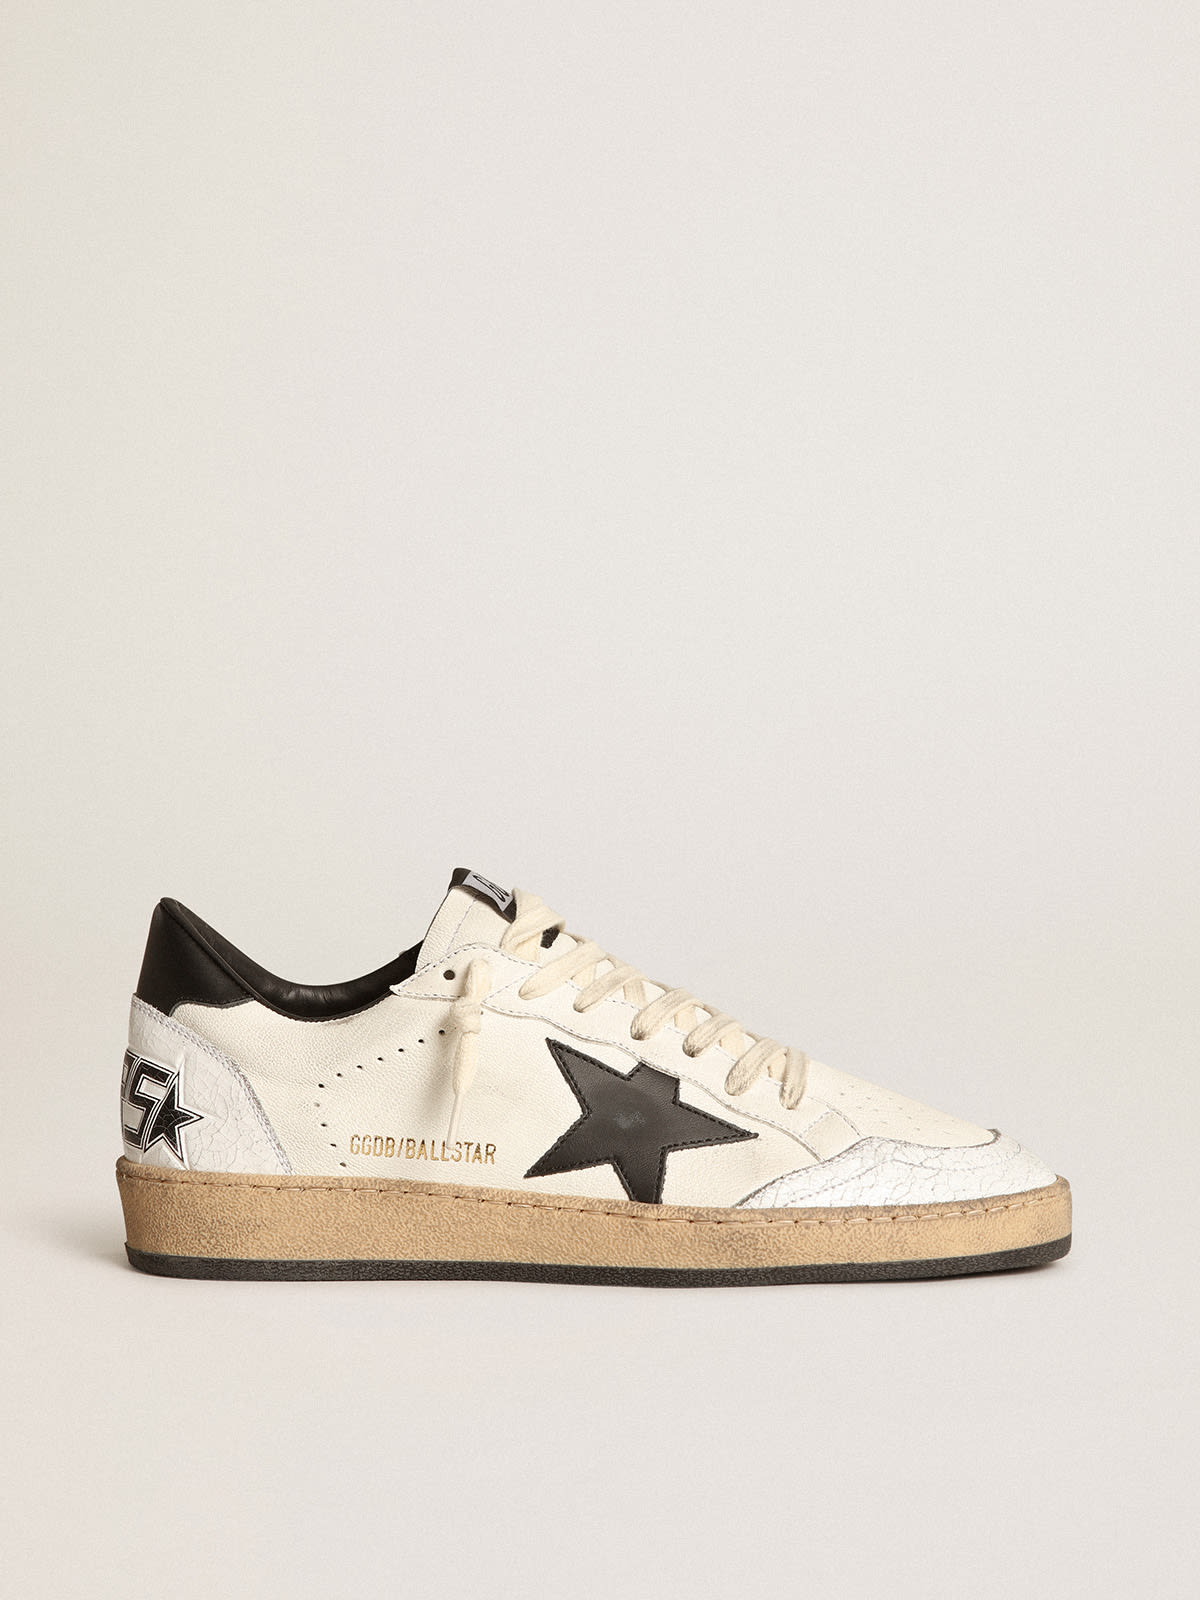 Men's Ball Star sneakers in white nappa leather with black leather star and  heel tab